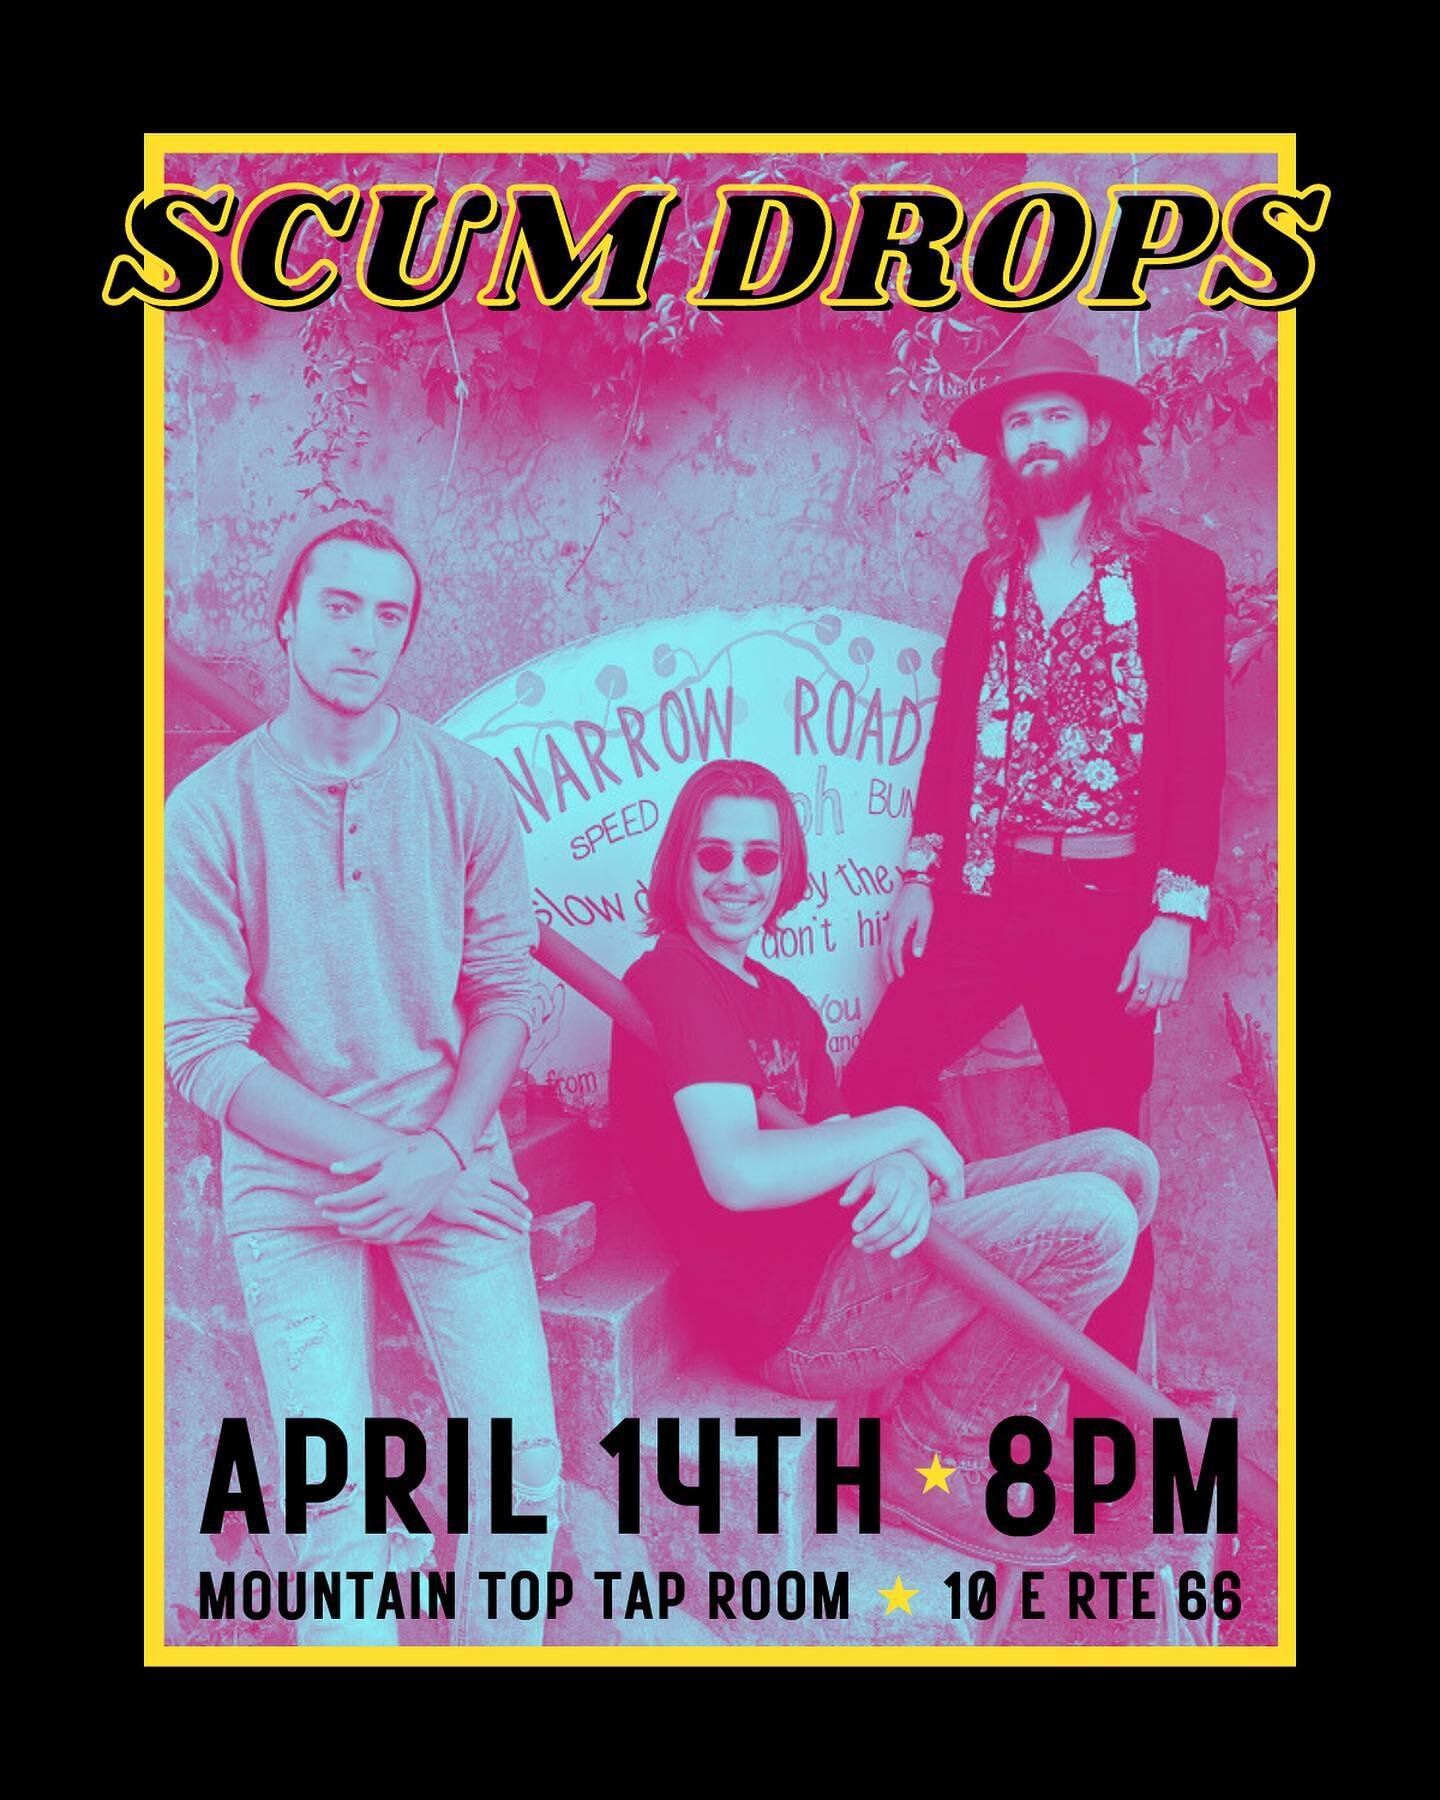 Tomorrow your favorite psychedelic rock band is back! See the @scumdropsband at 8!